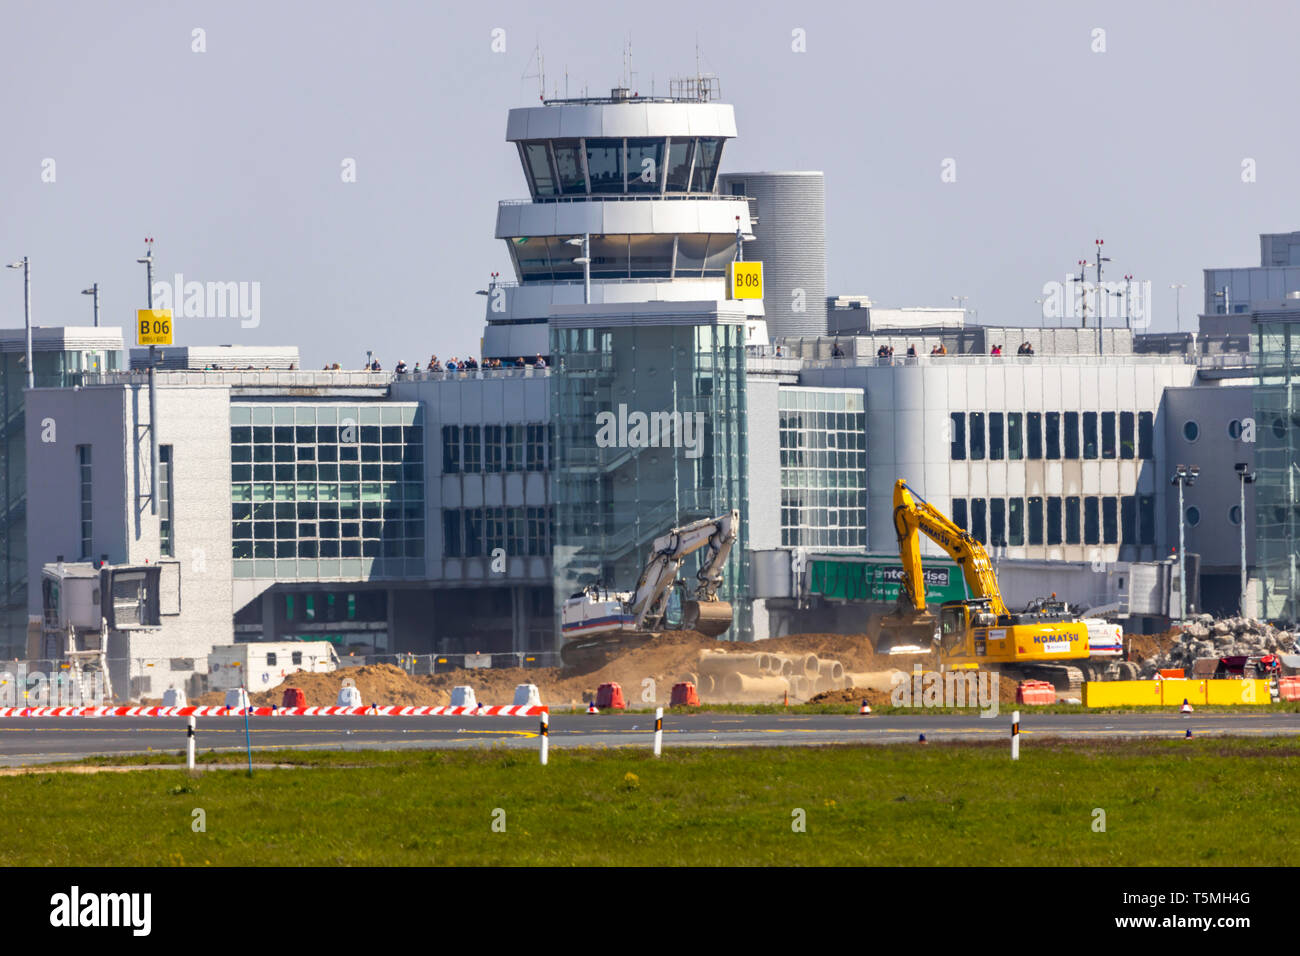 Dusseldorf International Airport, DUS, construction work at the airport apron, Tower, Stock Photo